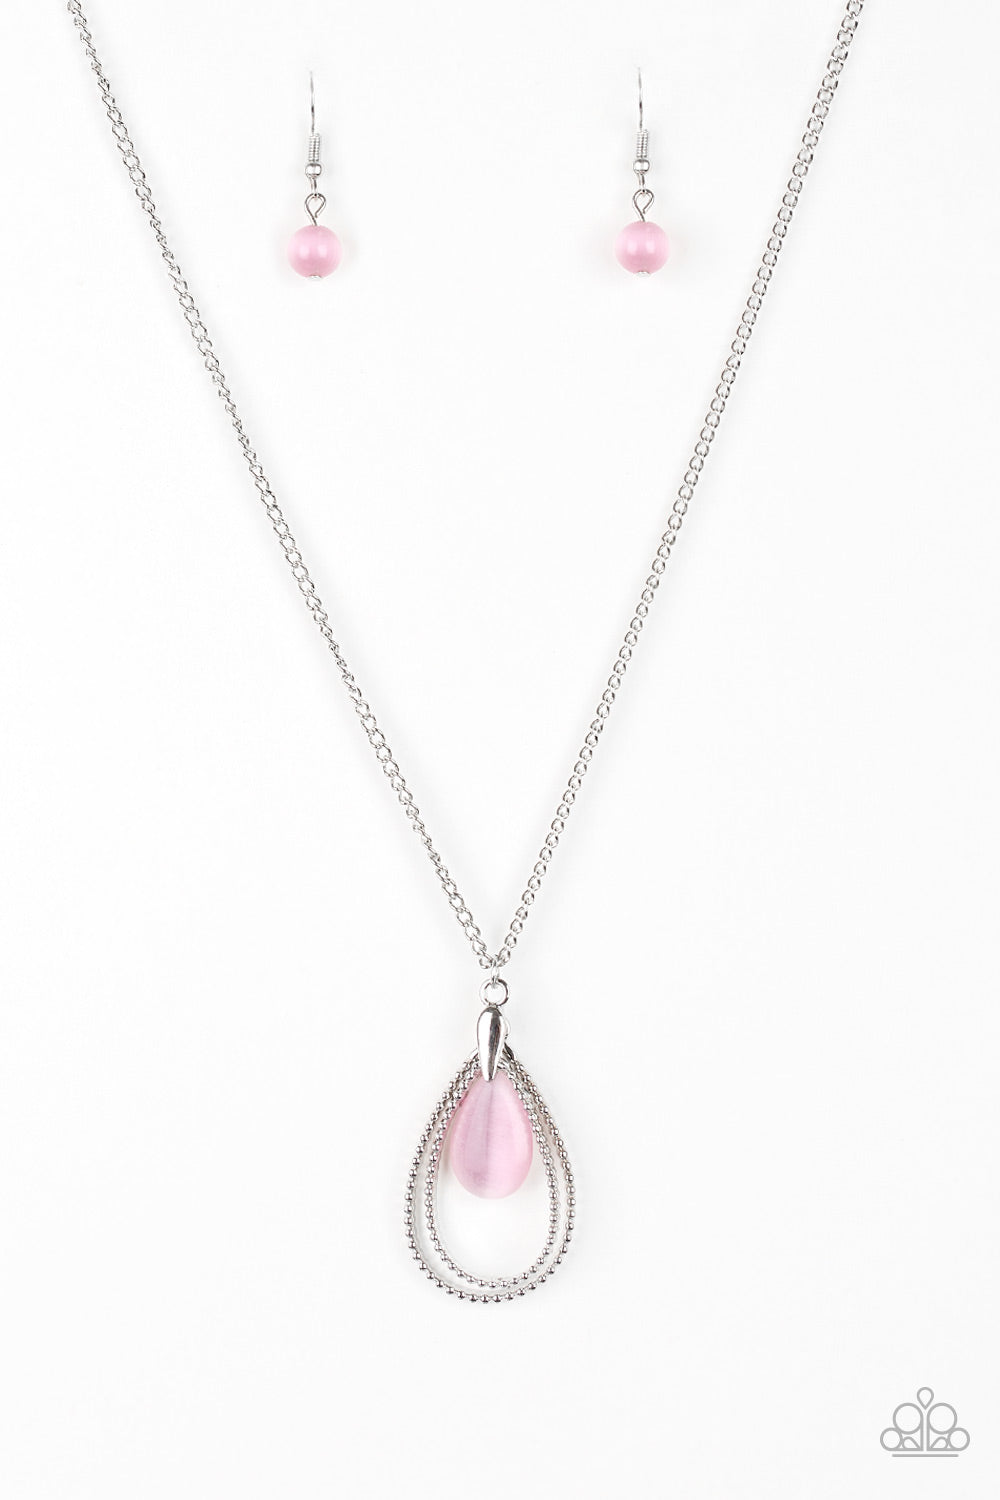 Teardrop Tranquility - Pink Necklace - Paparazzi Accessories